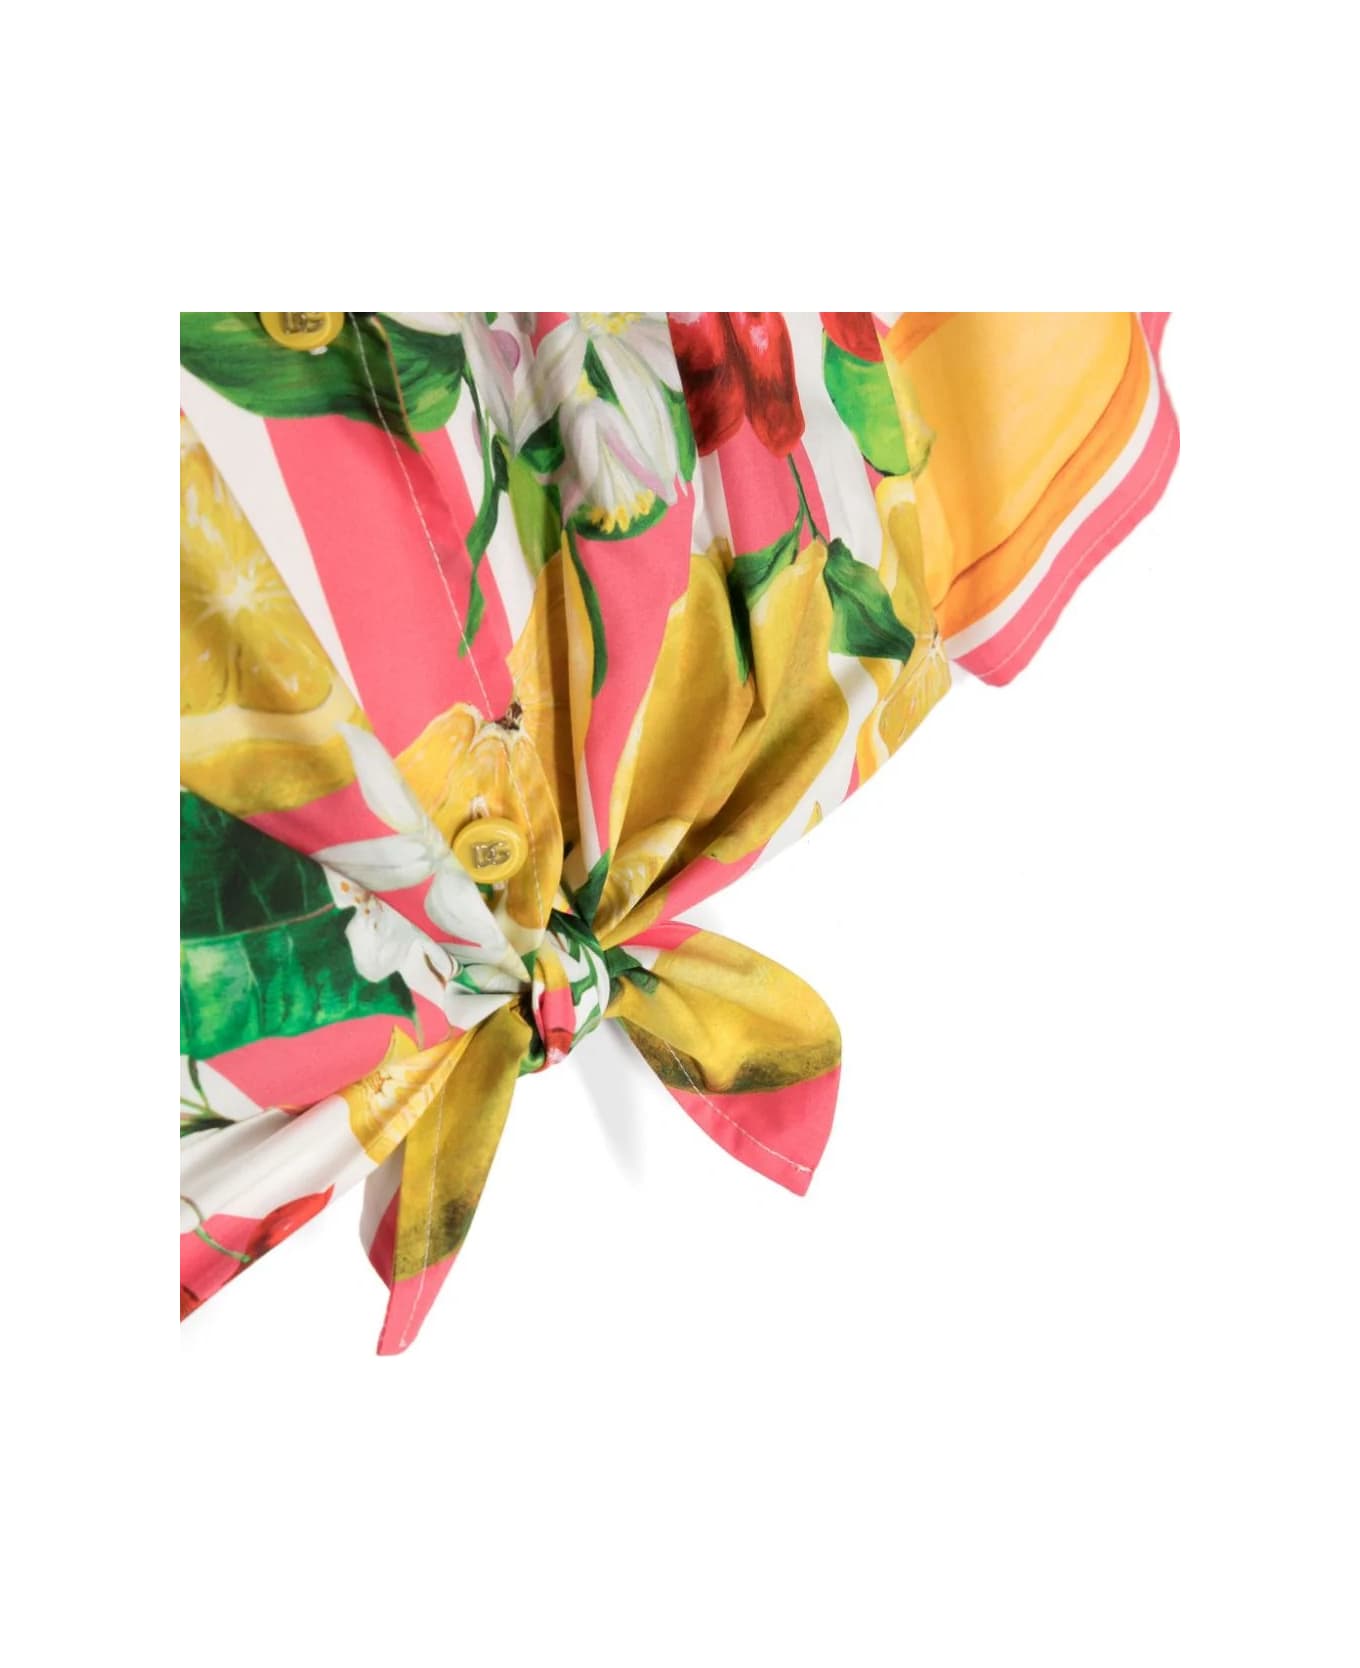 Dolce & Gabbana Cropped Shirt With Lemon And Cherry Print - Multicolour